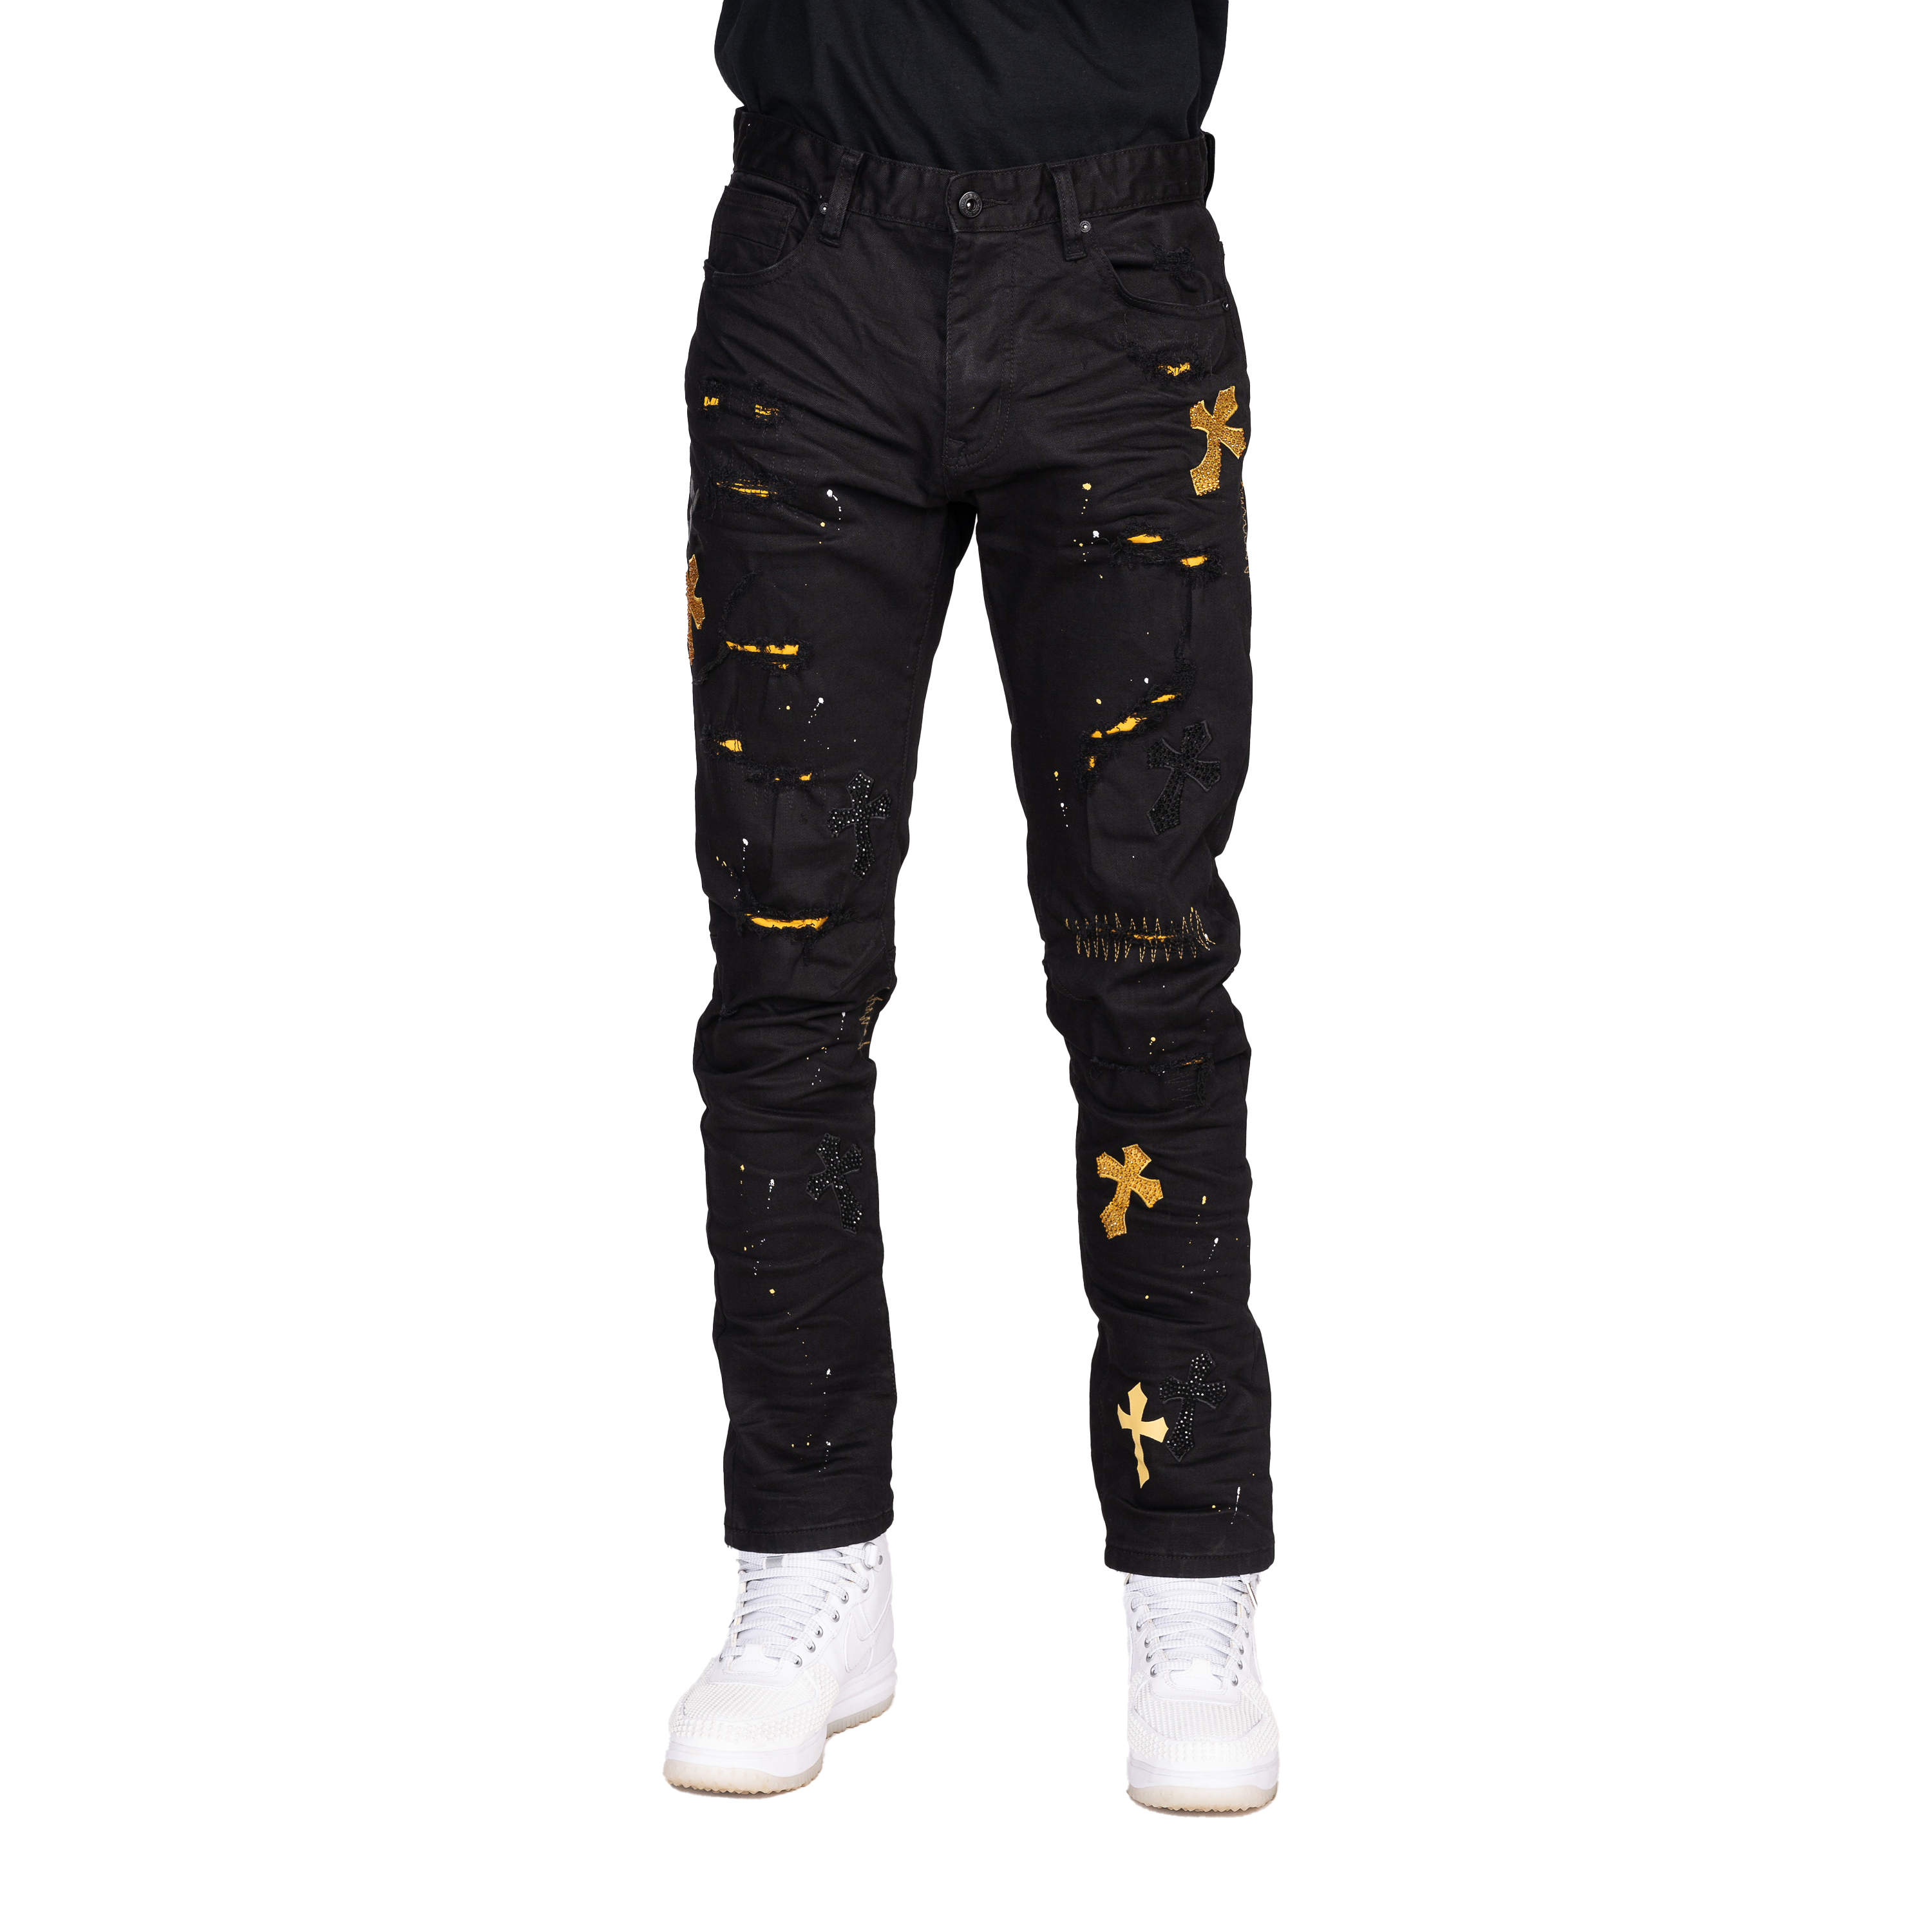 black and gold camo pants